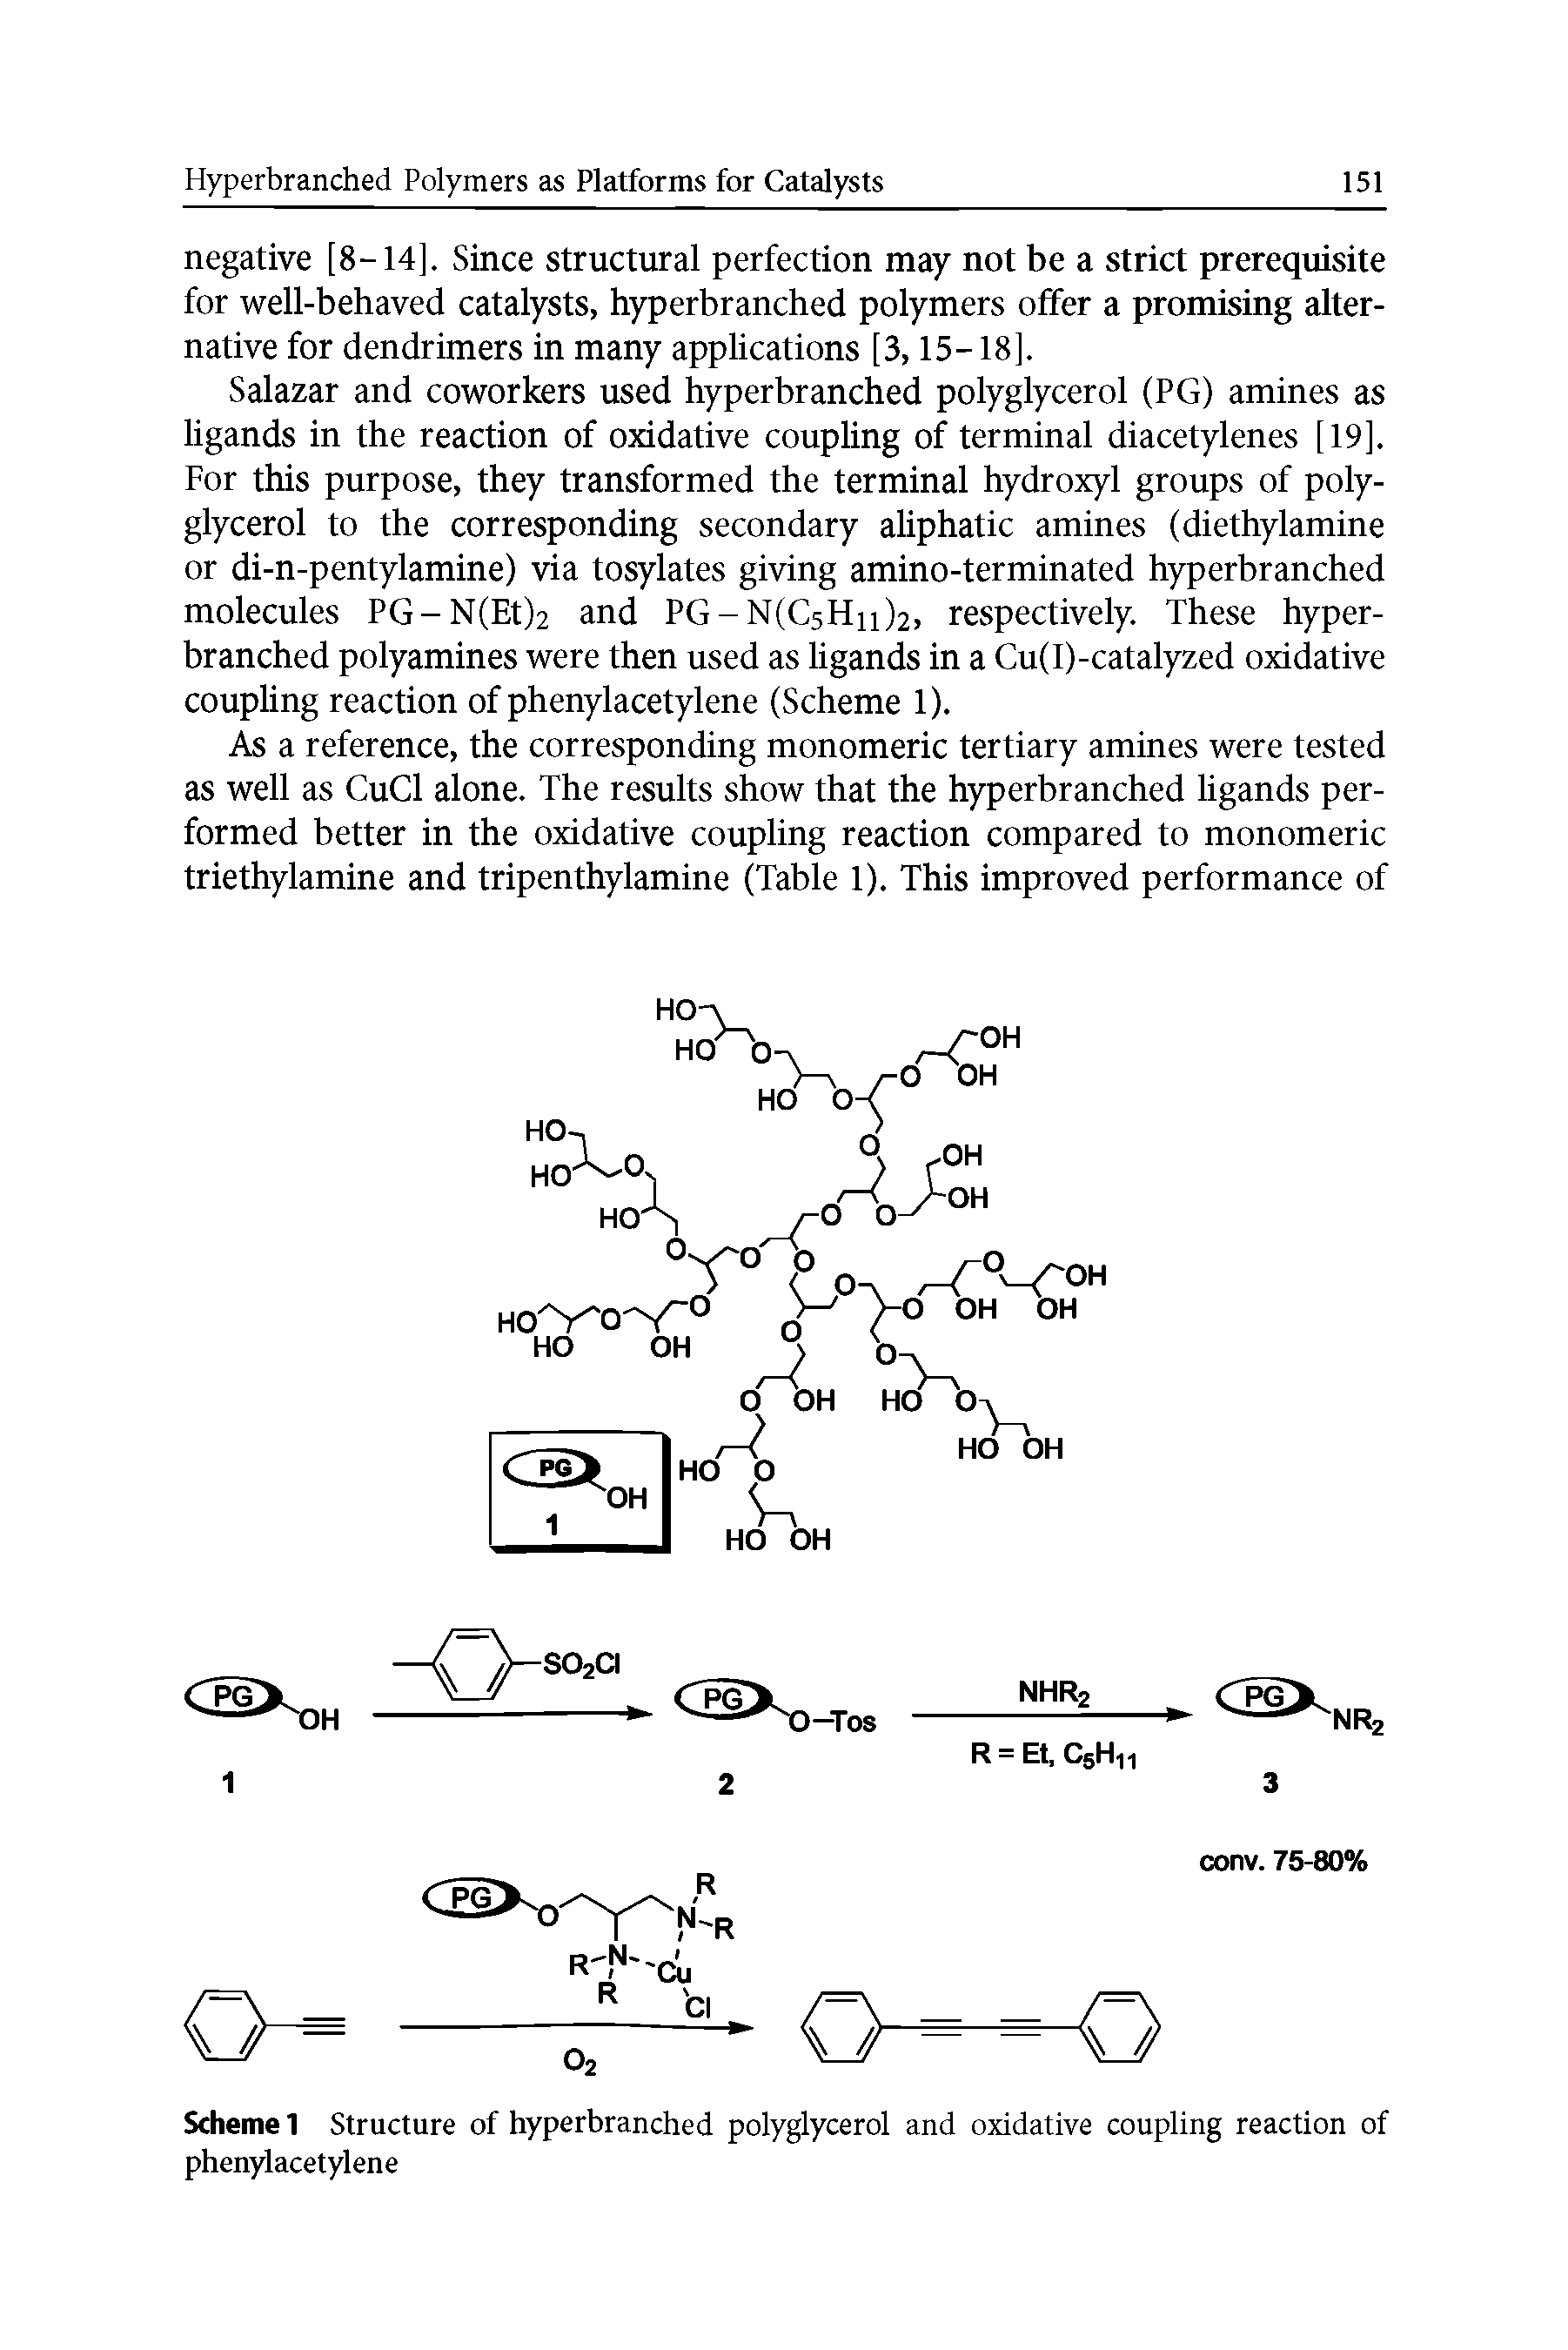 Scheme 1 Structure of hyperbranched polyglycerol and oxidative coupling reaction of phenylacetylene...